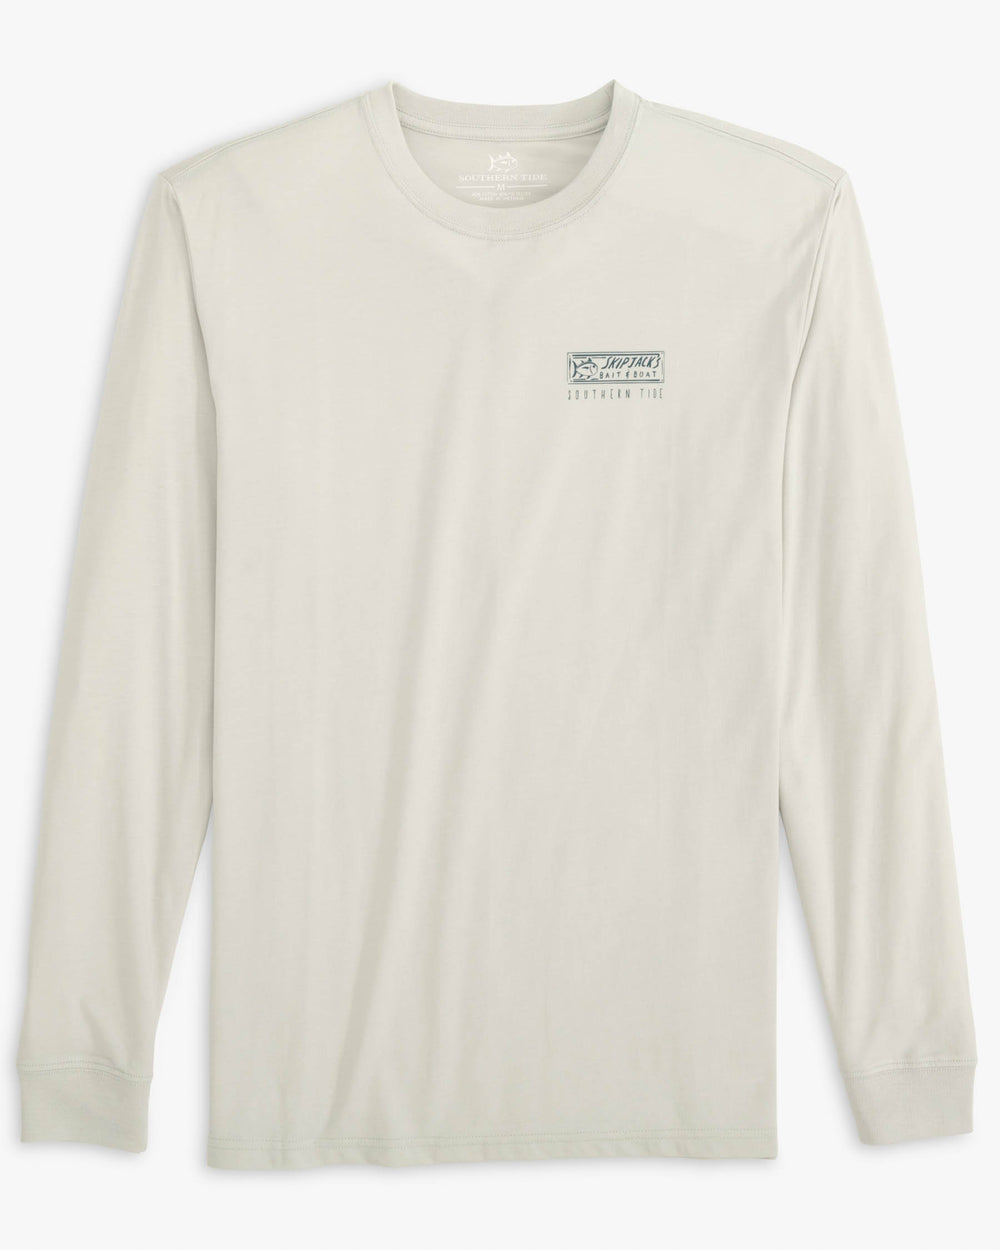 The front view of the Bait Shop Long Sleeve T-Shirt by Southern Tide - Silver Lake